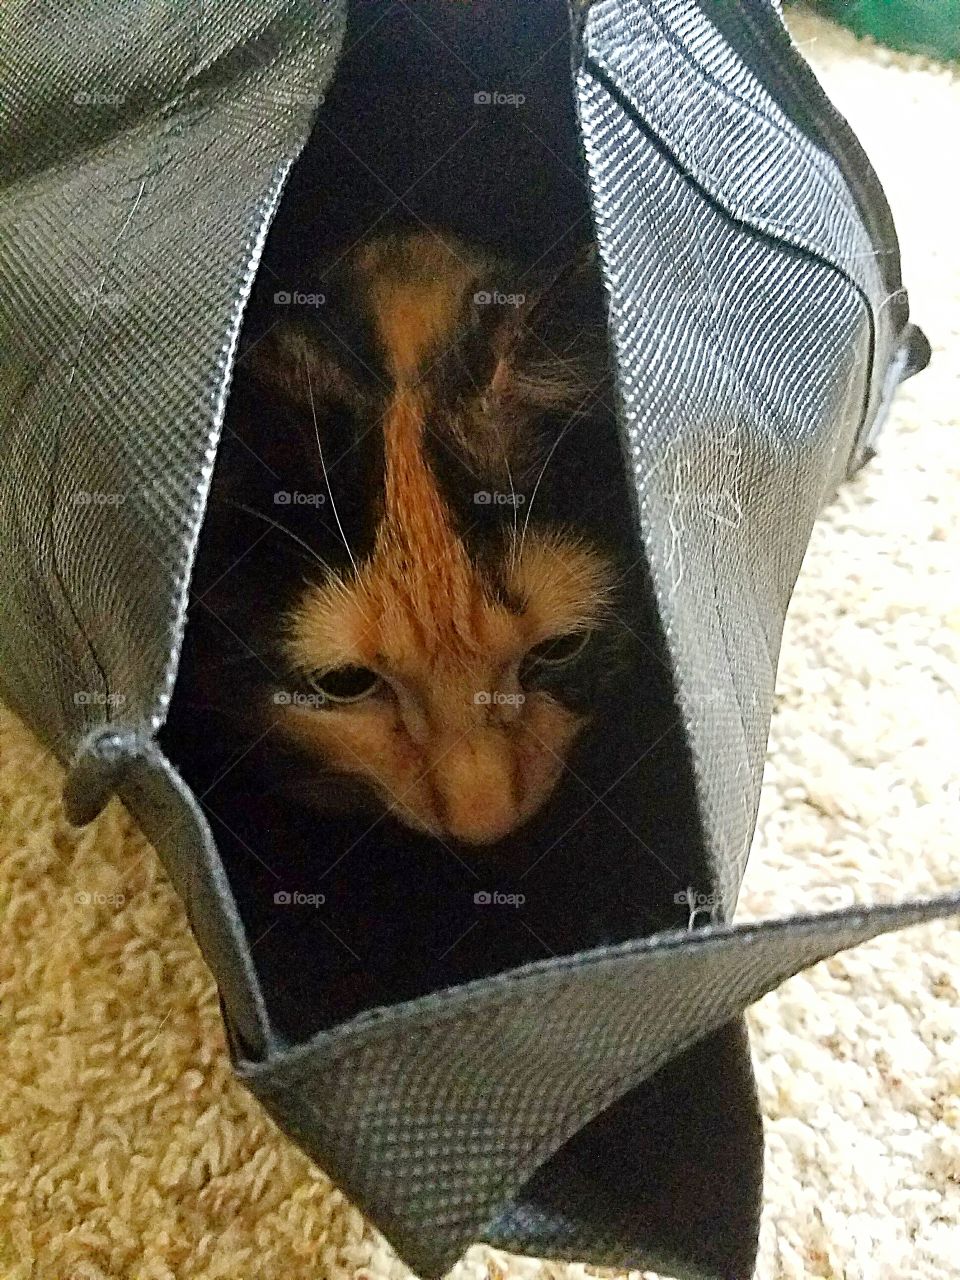 Calico in a Bag